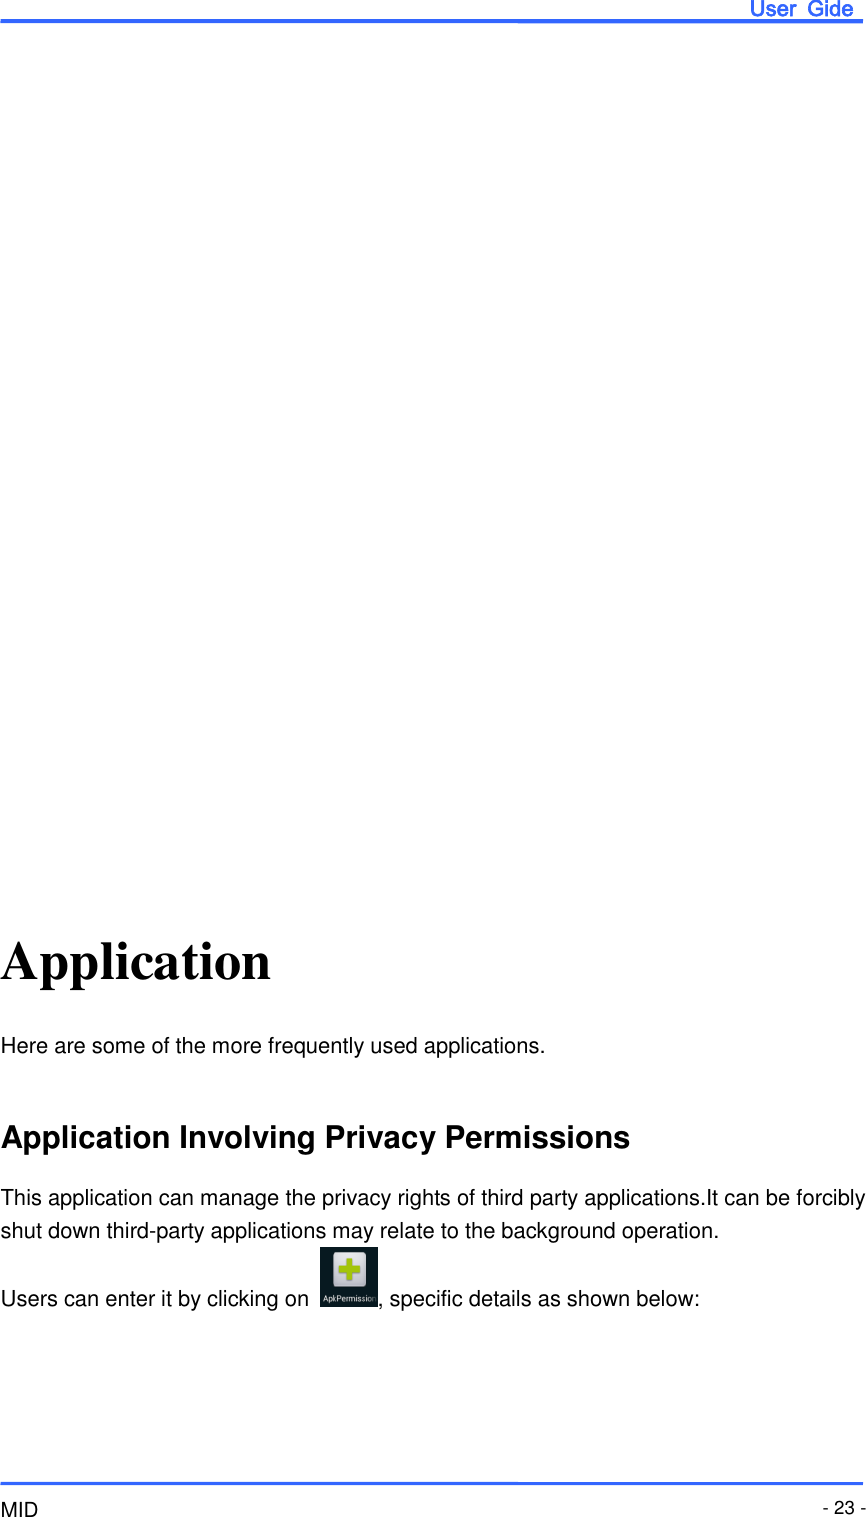                       User  Gide MID - 23 -                            Application Here are some of the more frequently used applications.  Application Involving Privacy Permissions This application can manage the privacy rights of third party applications.It can be forcibly shut down third-party applications may relate to the background operation. Users can enter it by clicking on  , specific details as shown below:  